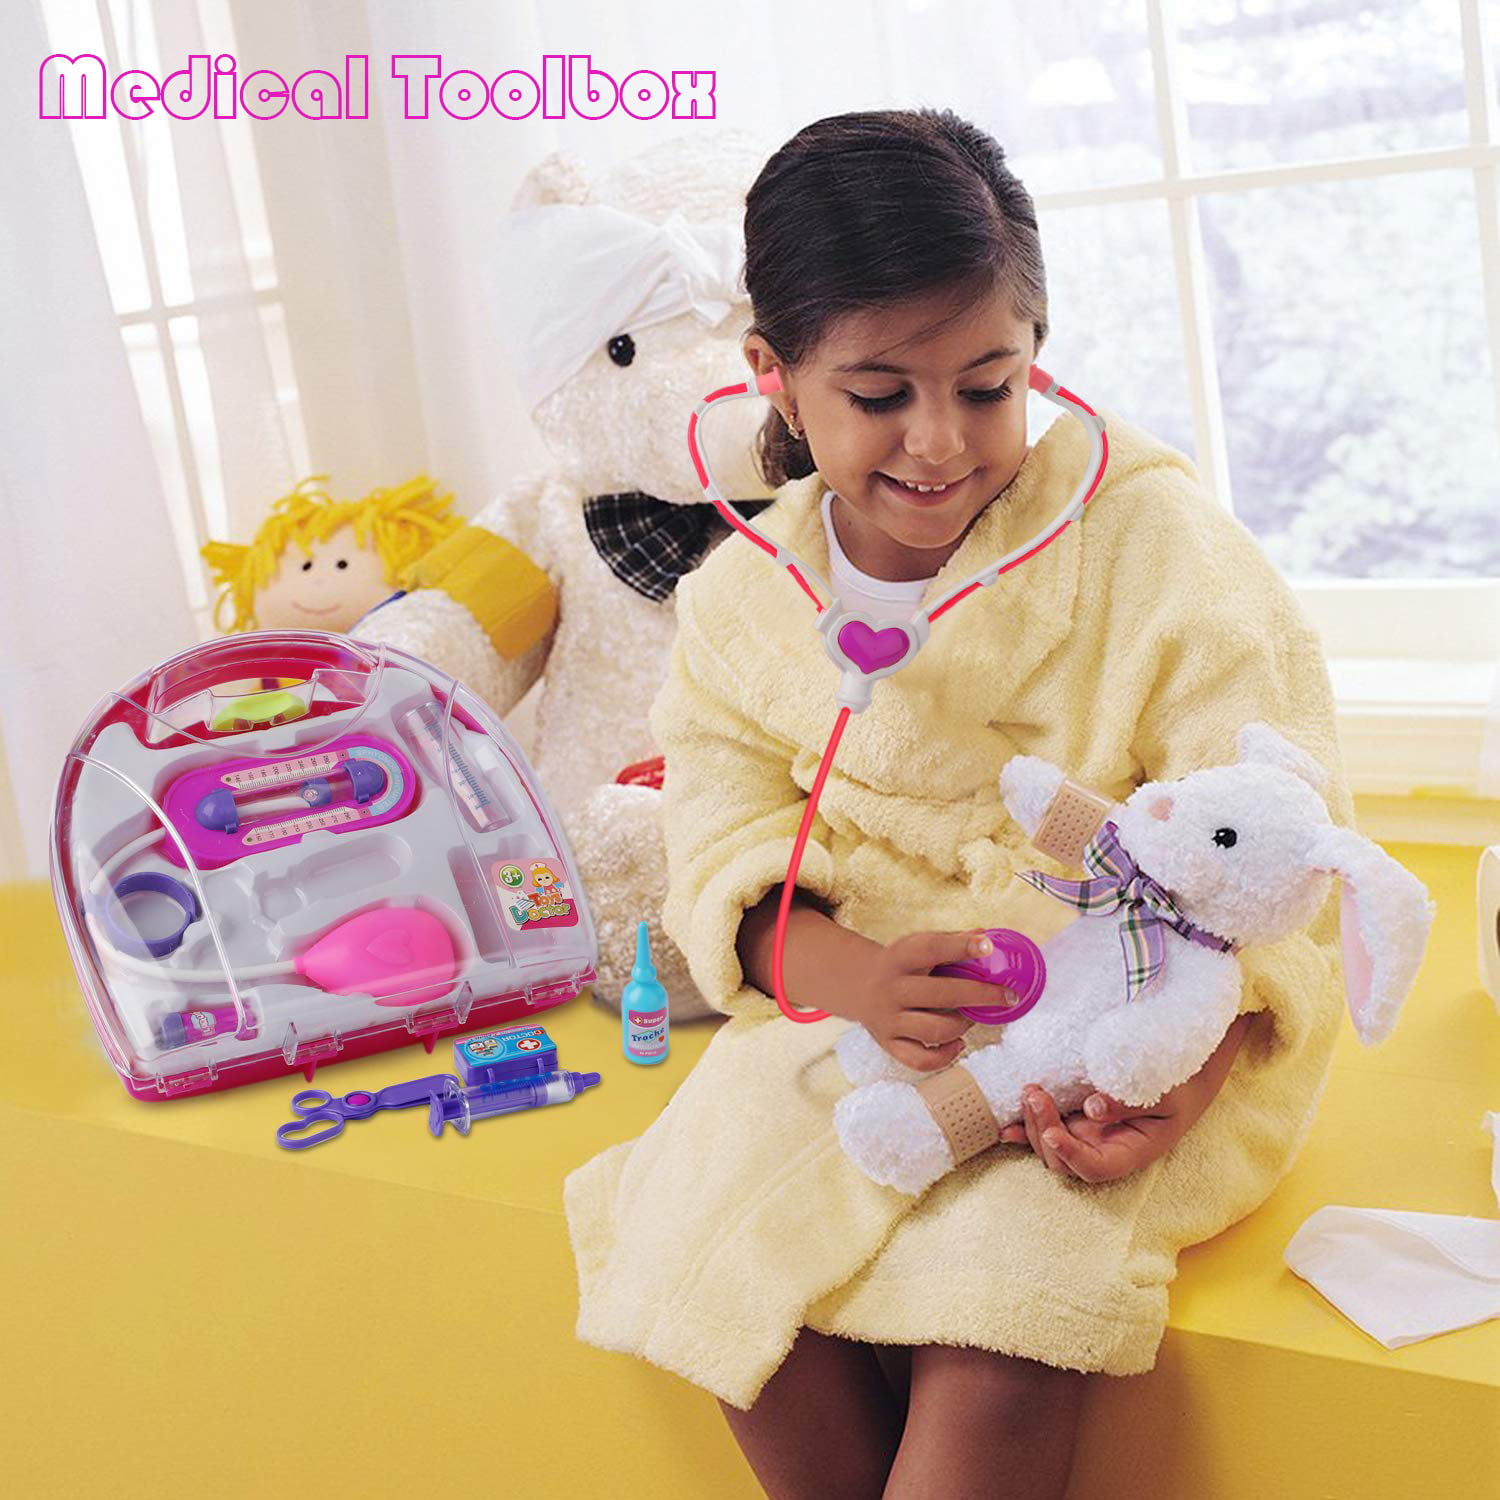 Details about   Kids Doctor Playset Pretend Play Medical Tools Box Kit Educational Toy Gift Set